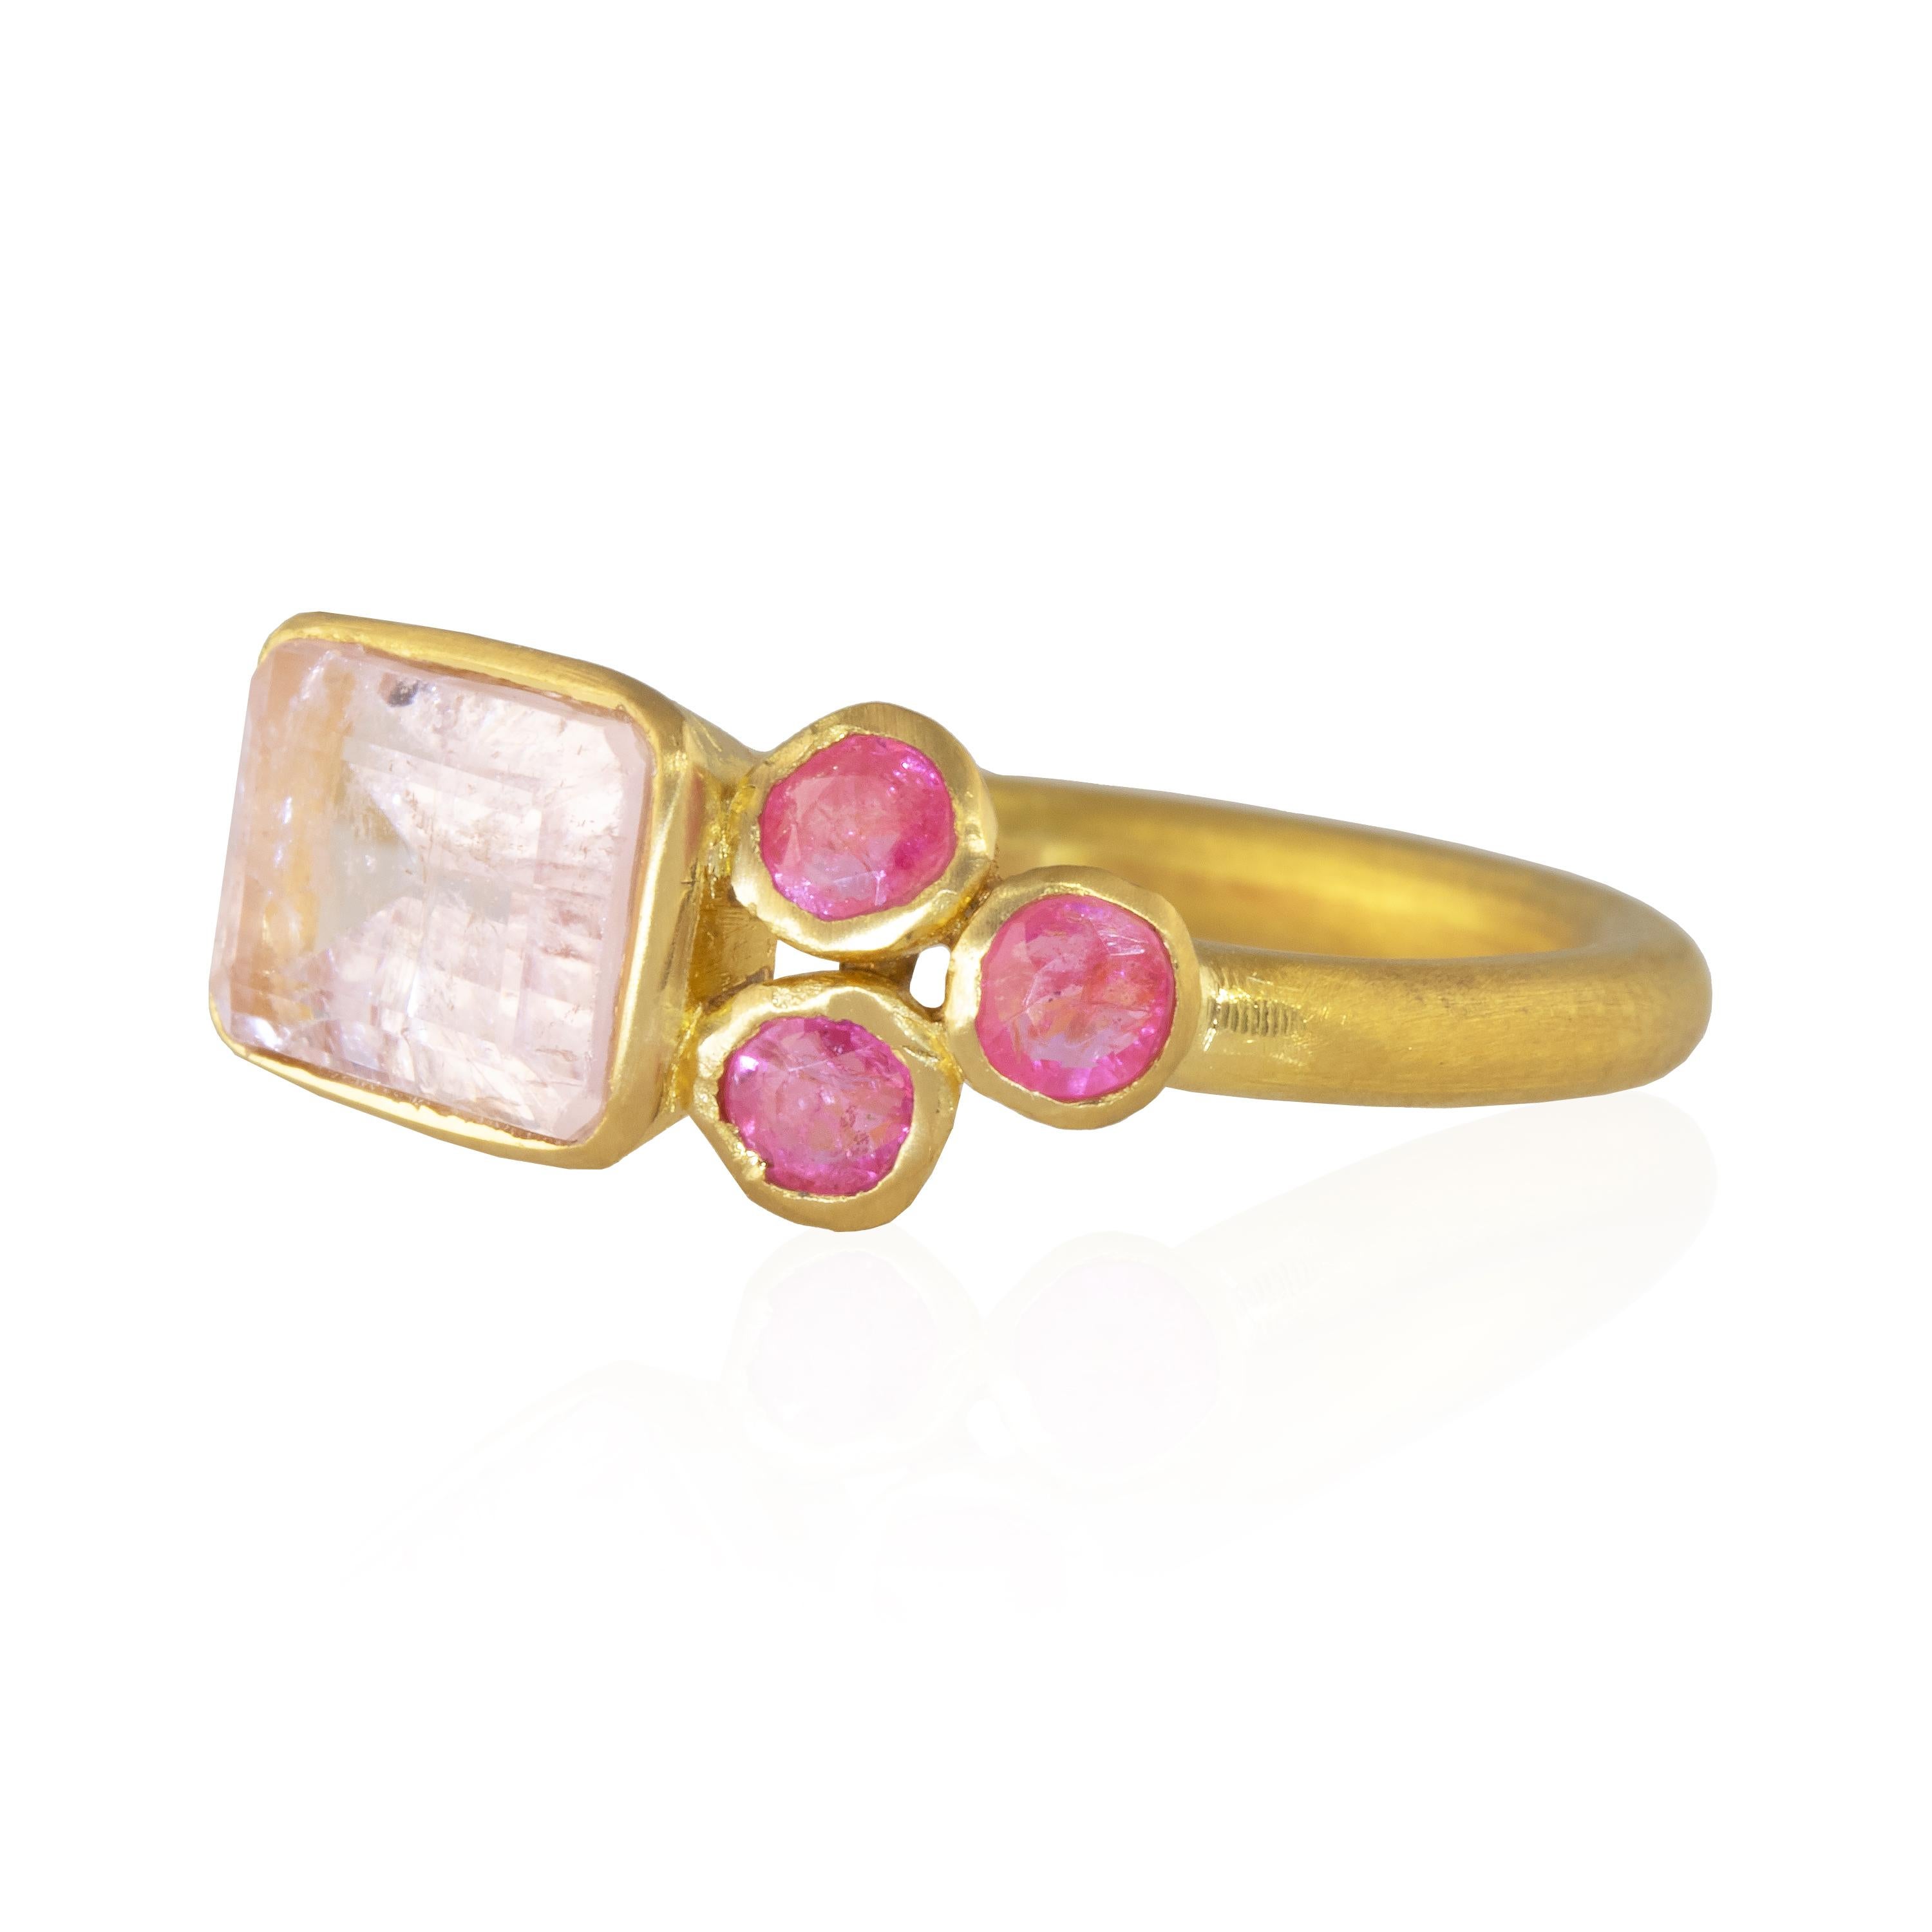 This gorgeous ring features an emerald cut morganite in the center with three hot pink spinels on both sides. Hand made with artisans in Jaipur, this is one of a kind and set in 22k yellow gold. 

Morganite, with its lovely pink hue, is associated